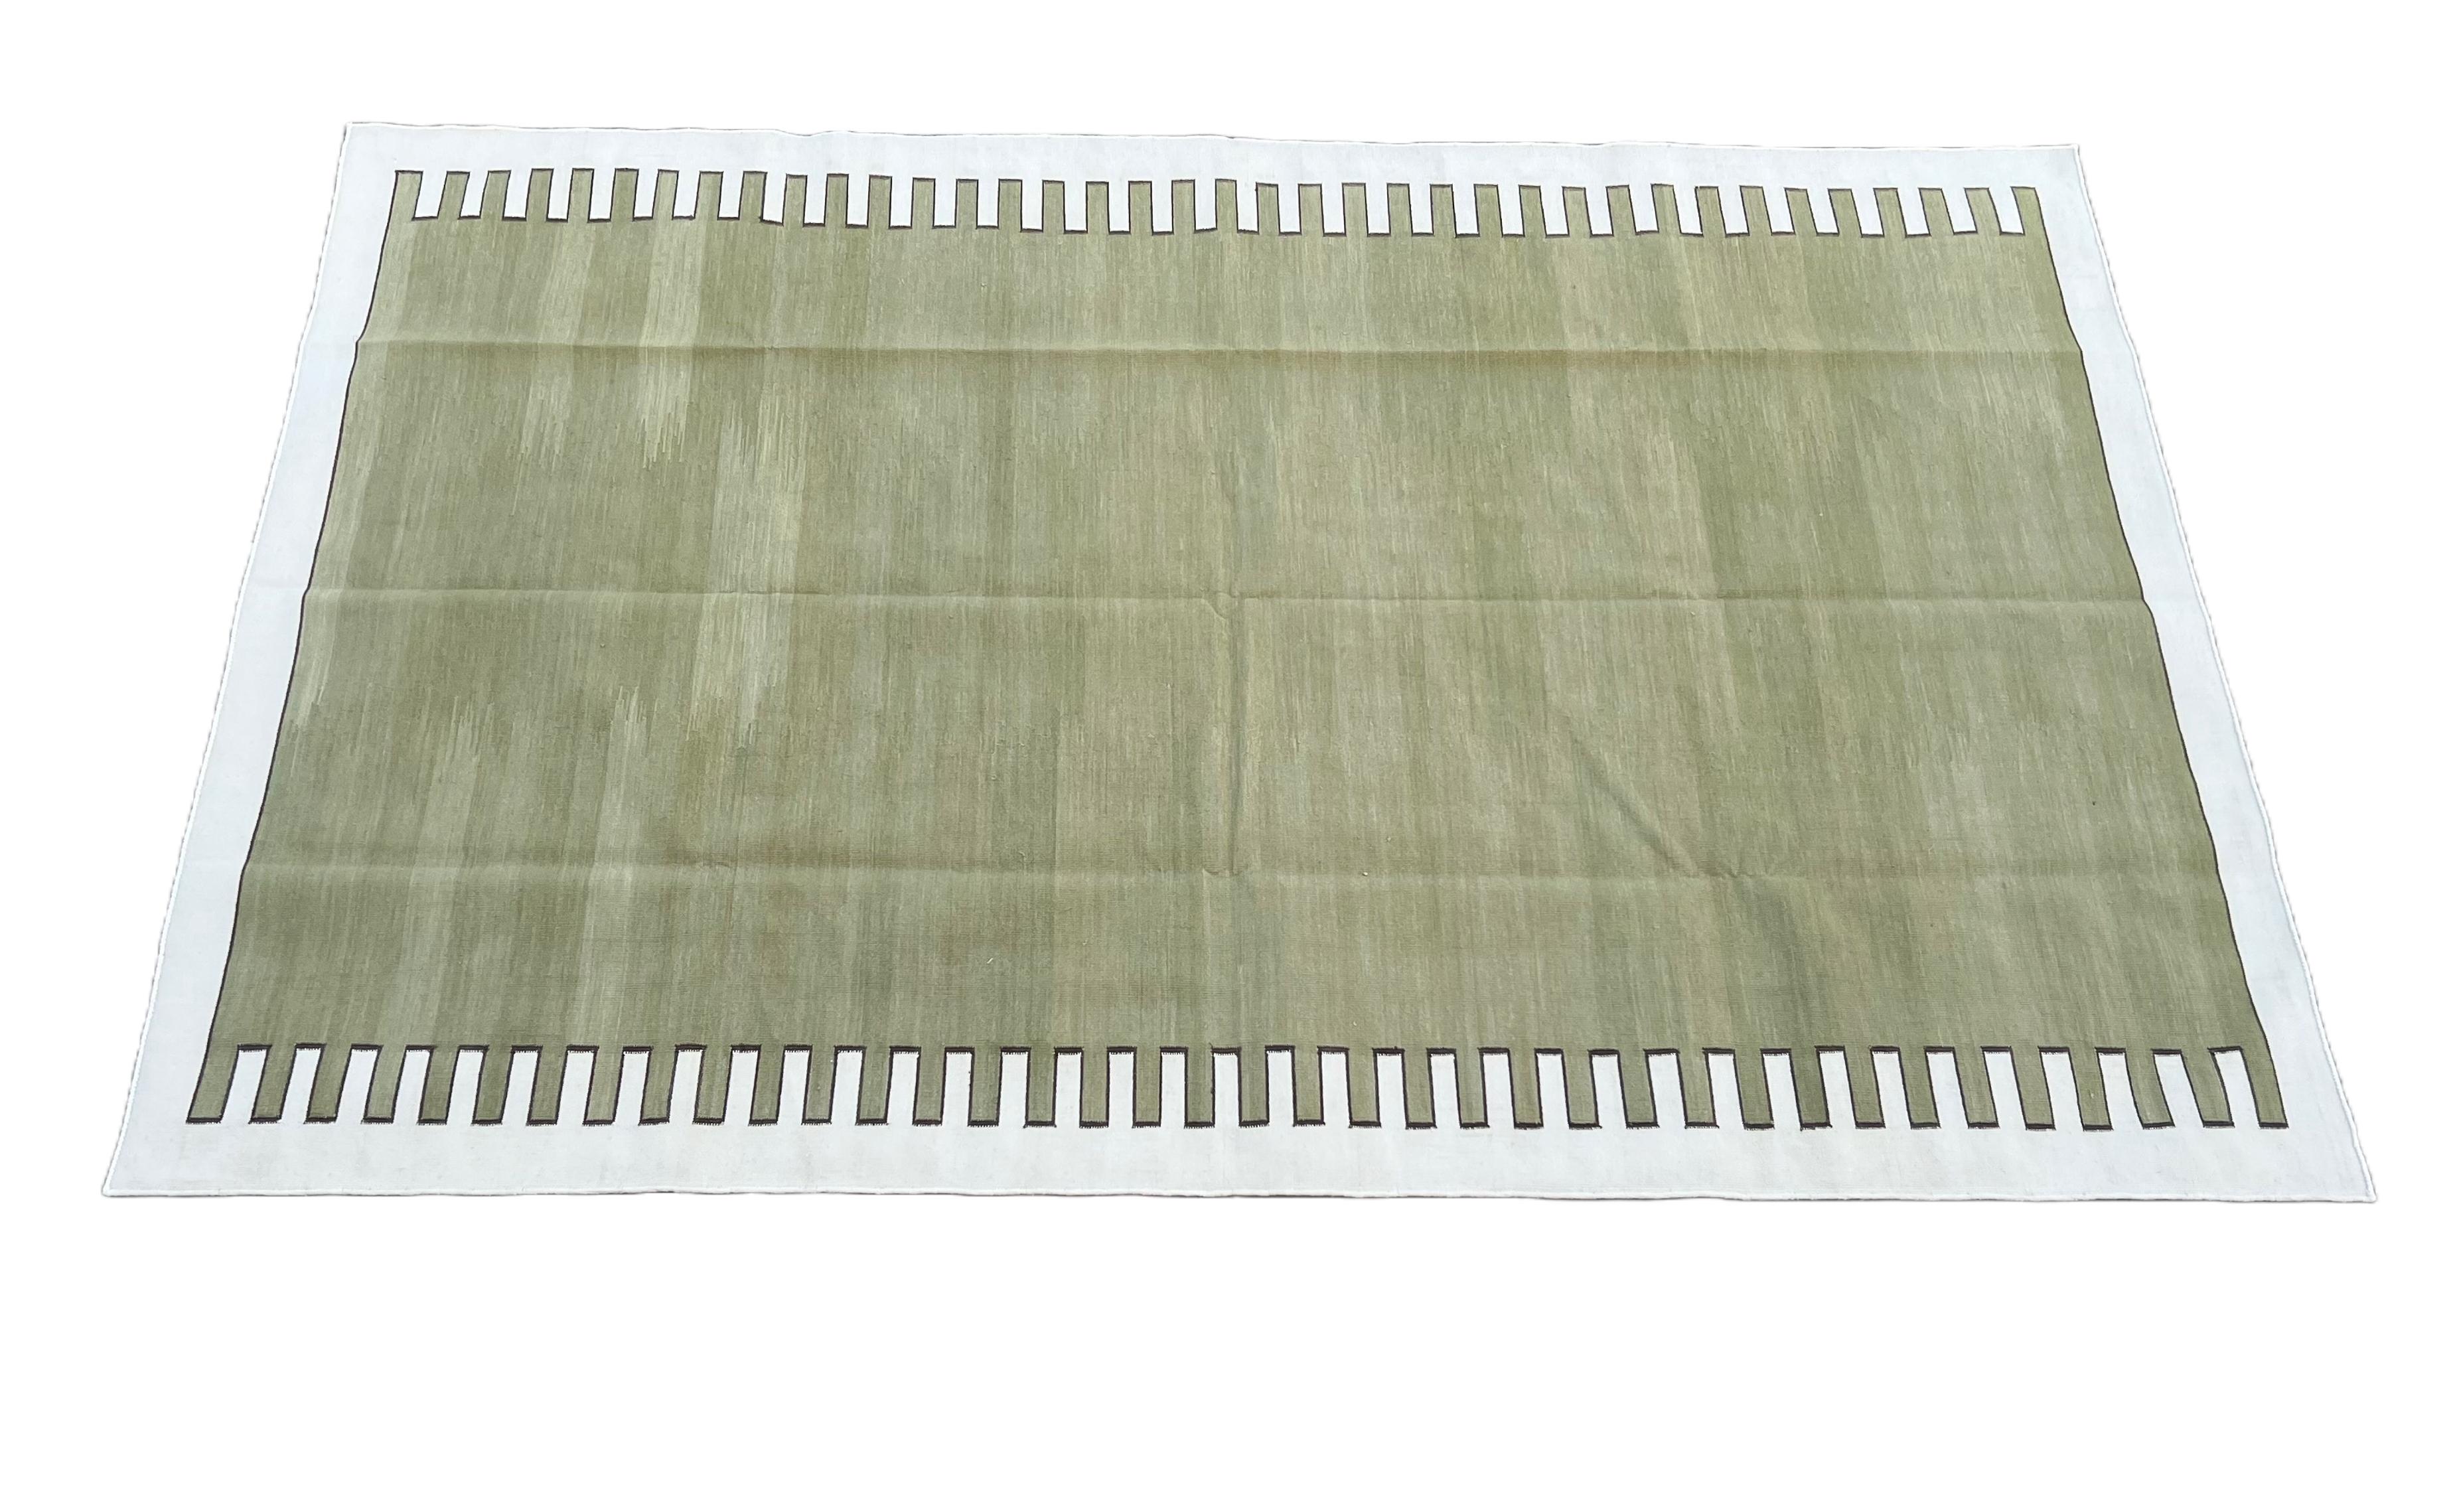 Mid-Century Modern Handmade Cotton Area Flat Weave Rug, Olive Green & Cream Zig Zag Striped Dhurrie For Sale